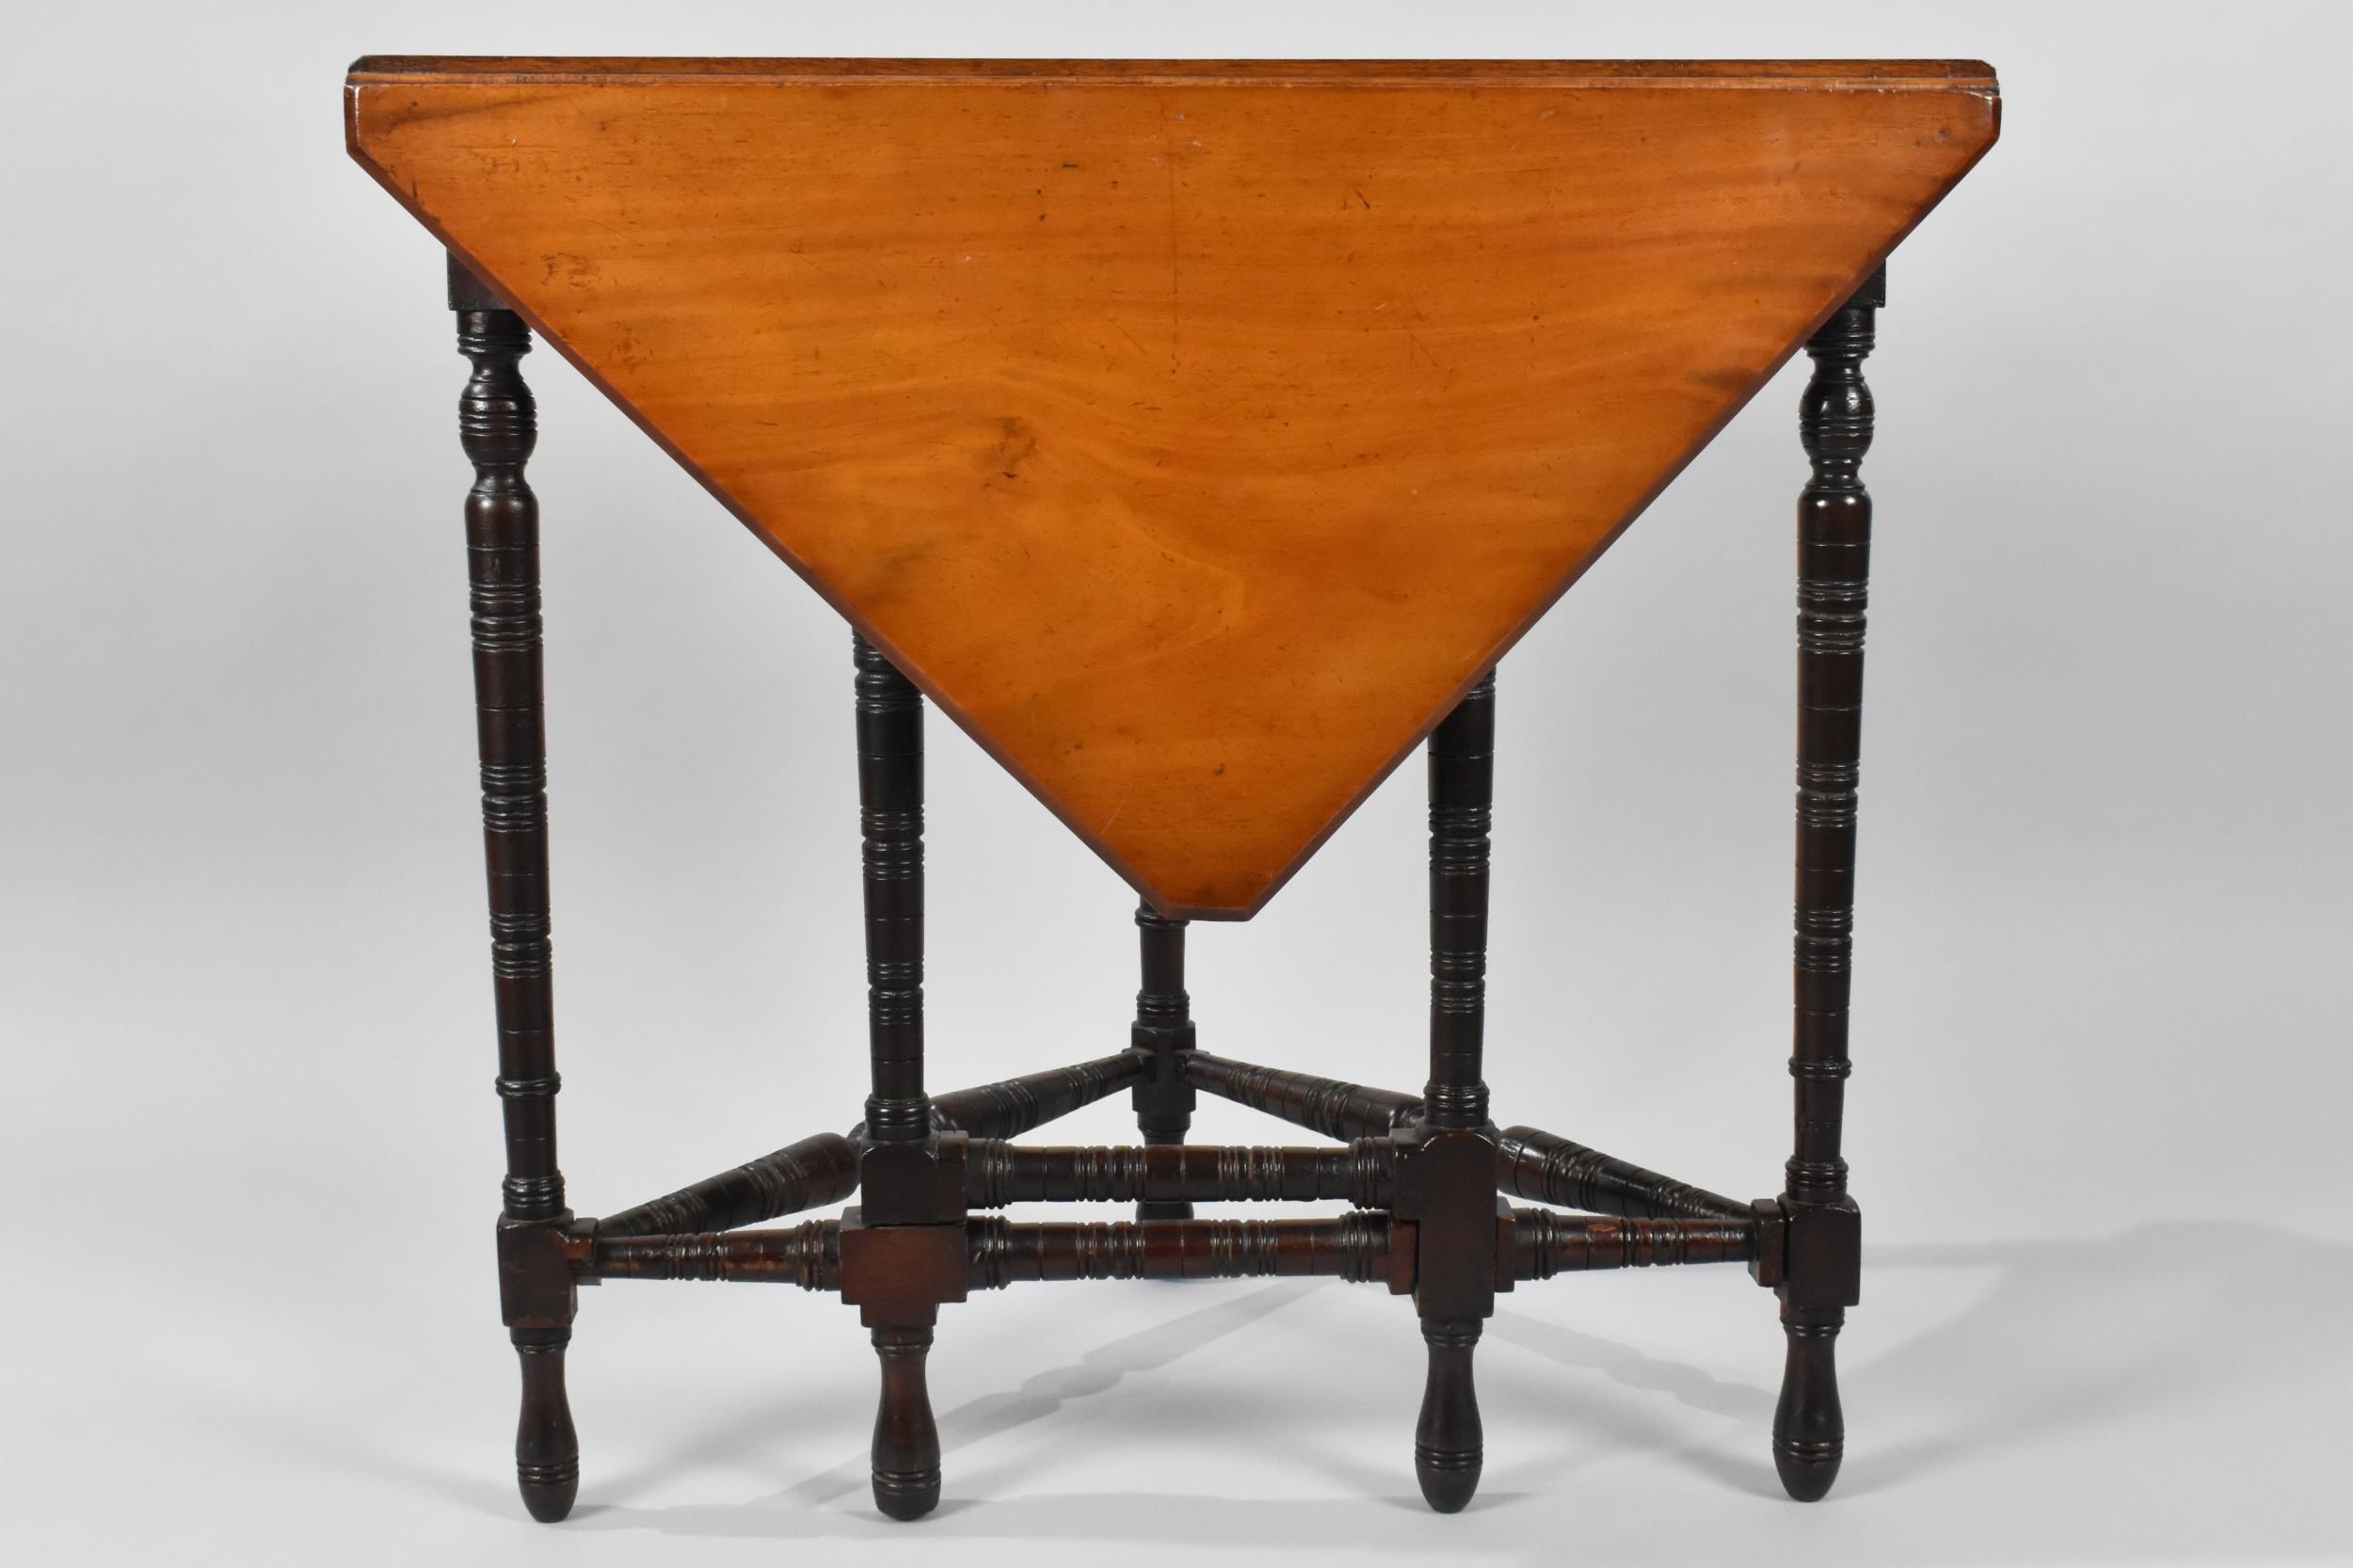 An Edwardian Mahogany Corner Table with Front Gate Leg Drop Leaf, Turned Supports, 70cm Wide and - Bild 5 aus 6